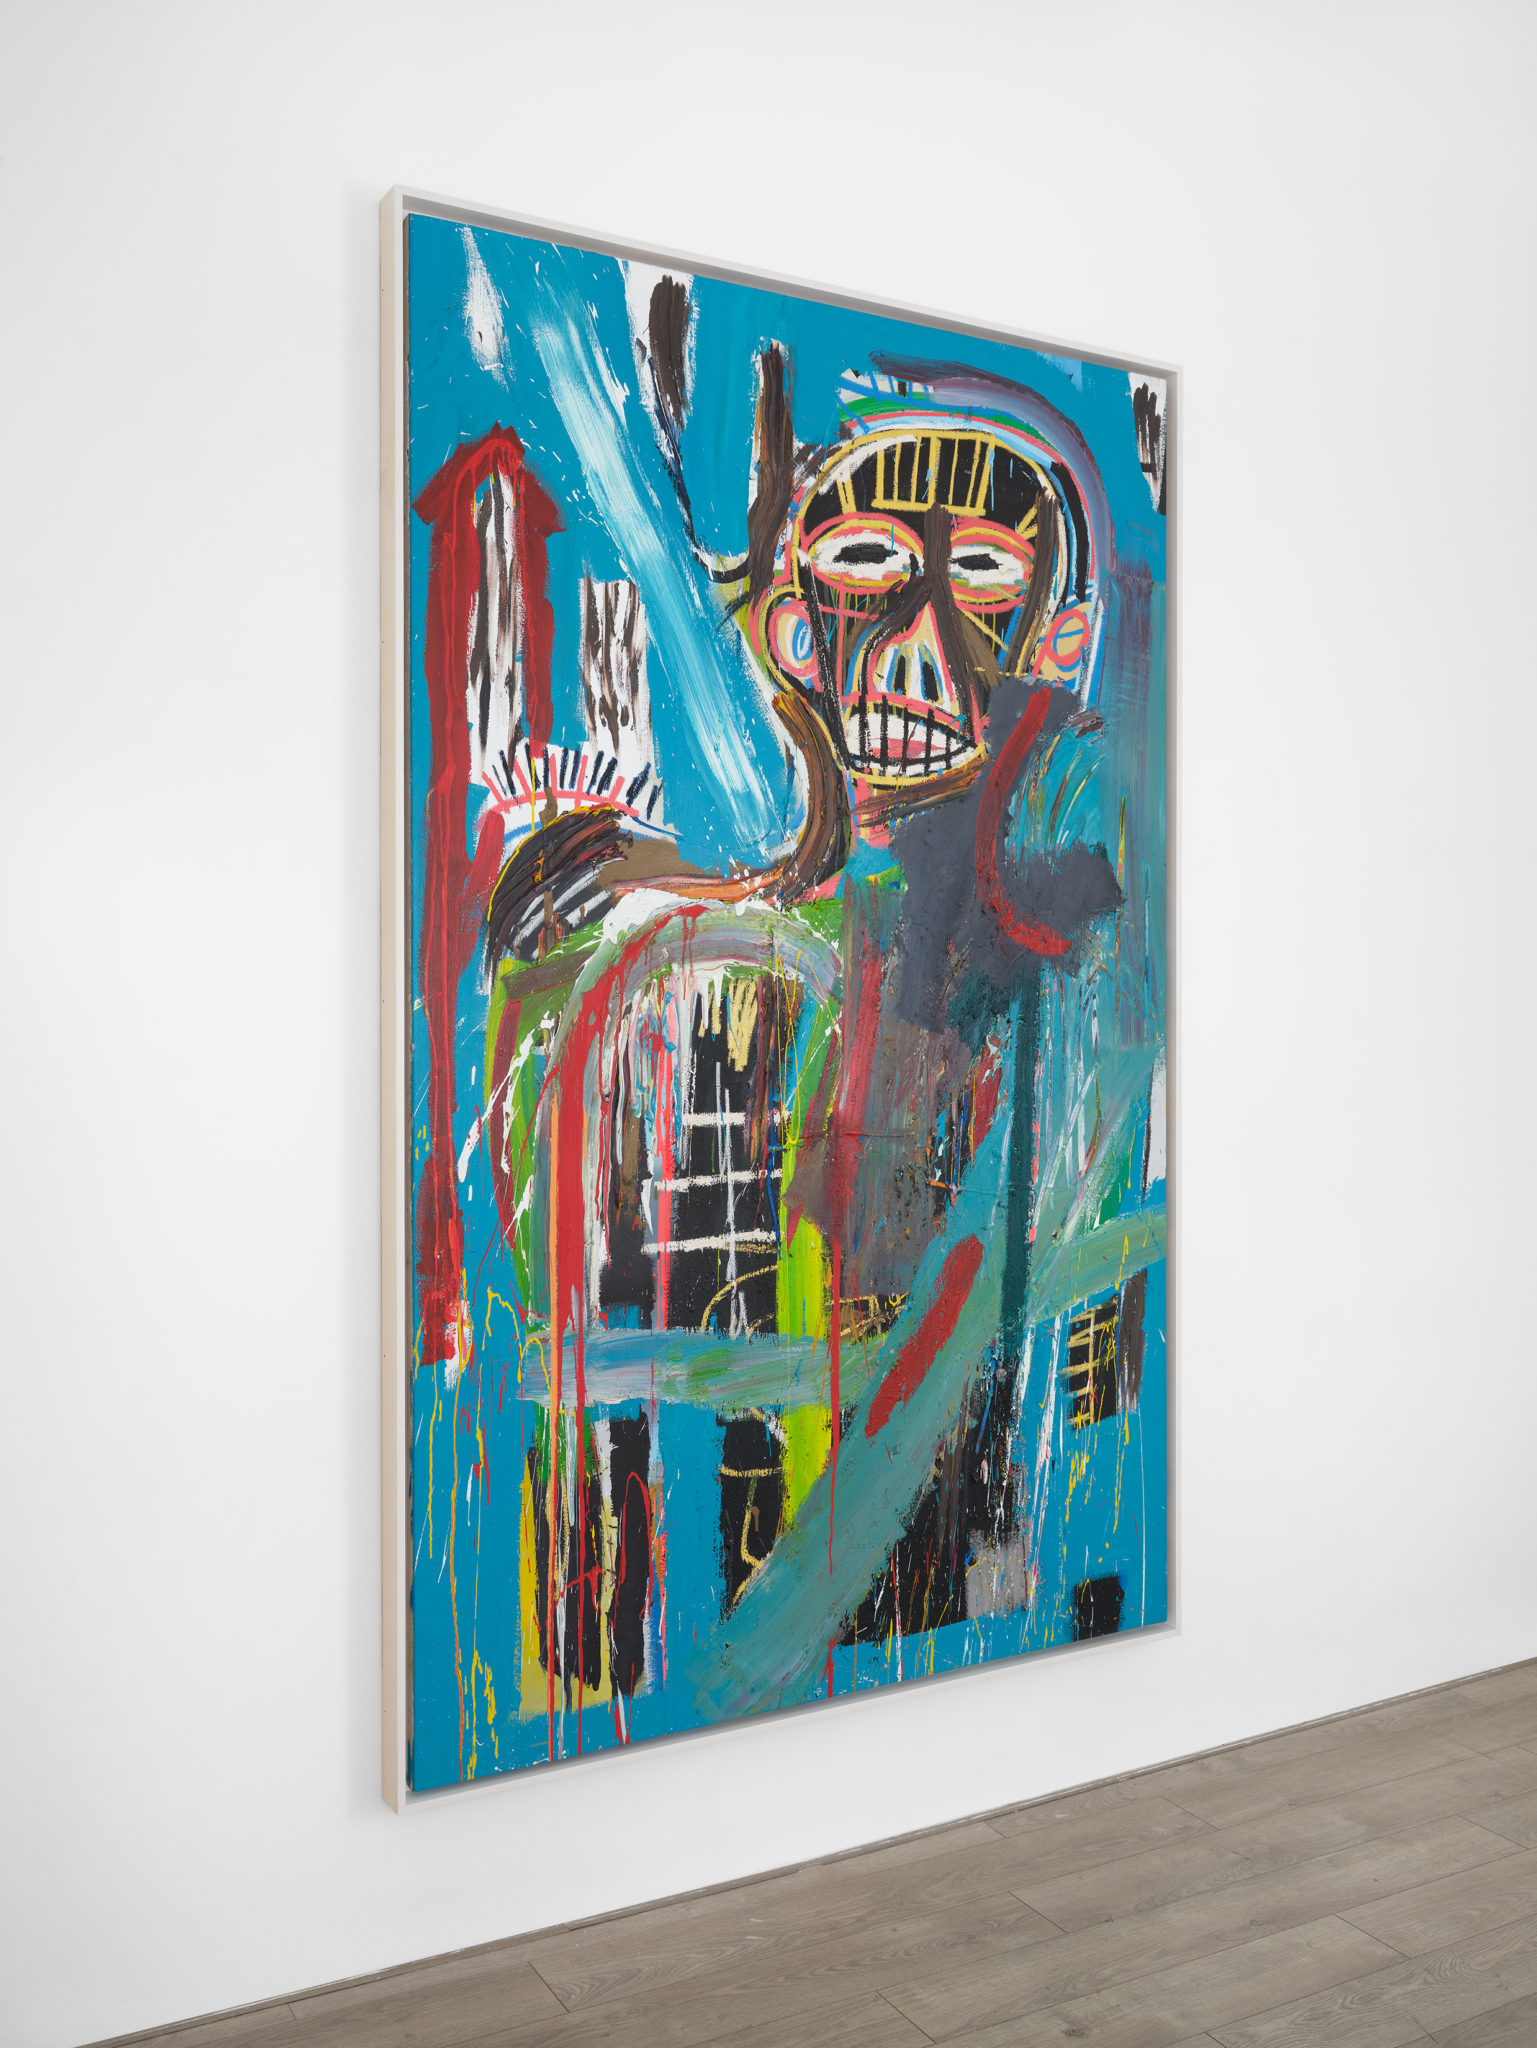 Side view of Jean-Michel Basquiat's painting Untitled (1982)